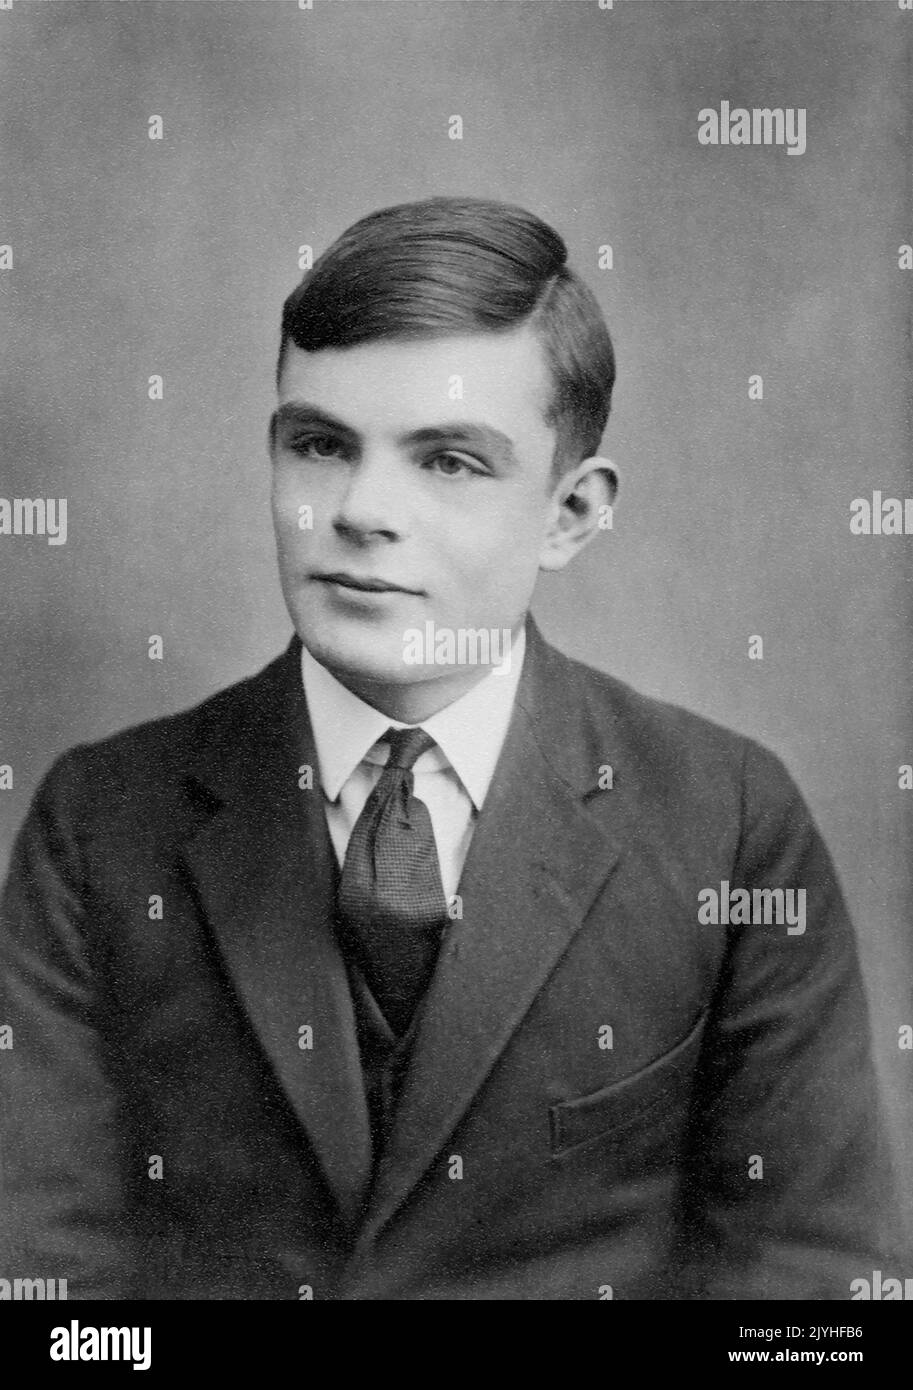 Britain / UK: Alan Turing (1912-1954), computer scientist and cryptologist instrumental in breaking Germany's 'enigma' machine code during World War II, c. 1928. Alan Mathison Turing was a British pioneering computer scientist, mathematician, logician, cryptanalyst, philosopher, mathematical biologist, and marathon and ultra distance runner. He was highly influential in the development of computer science. Stock Photo